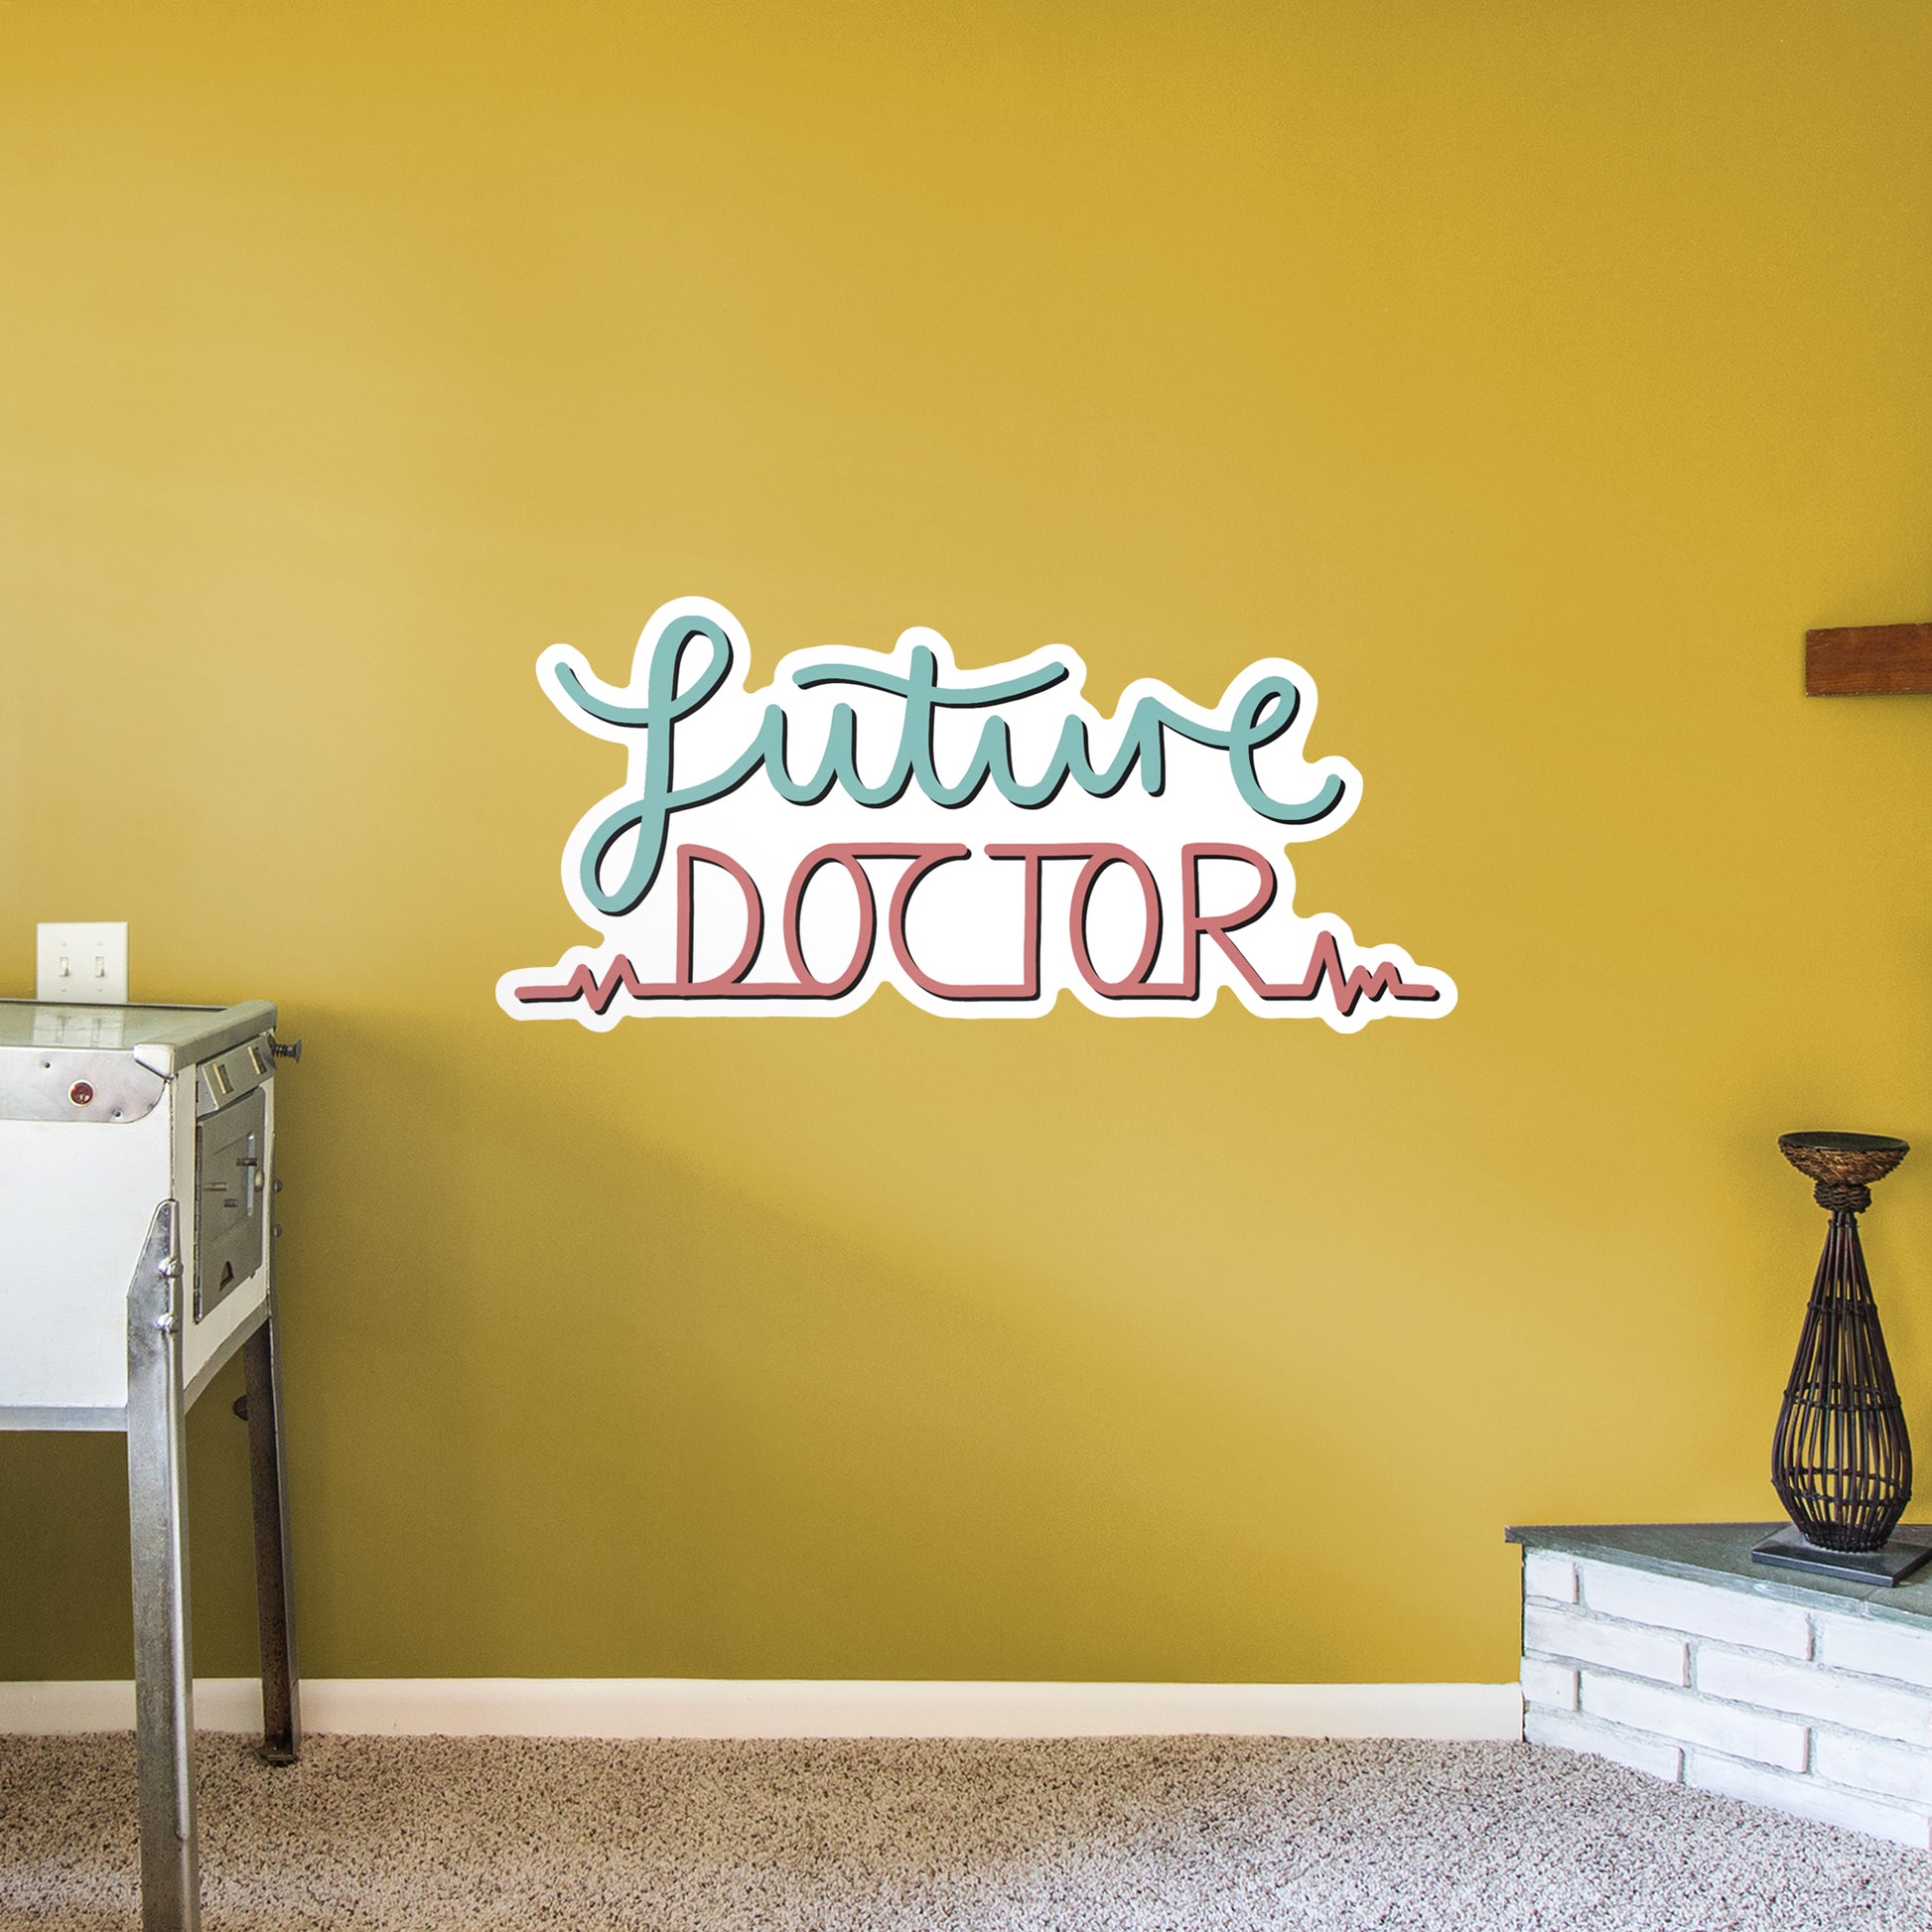 Giant Decal (23"W x 50"H)